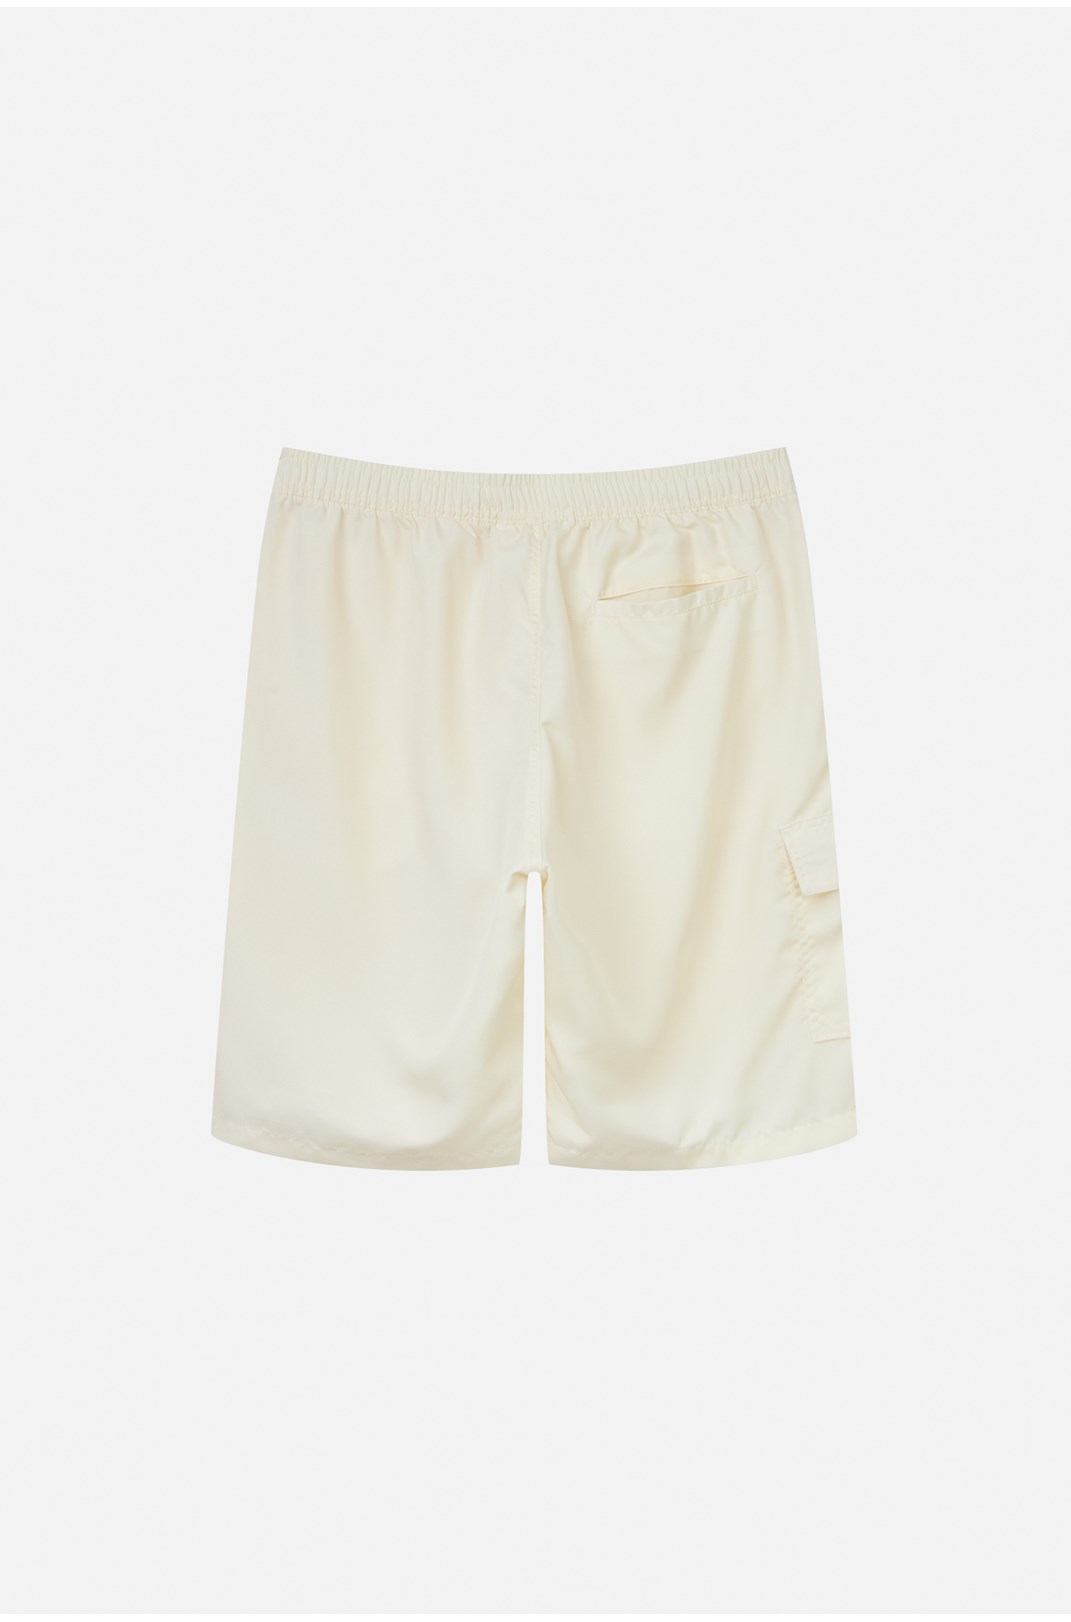 Shorts Cargo 9inches Approve Yrslf Inverse Collors Off White